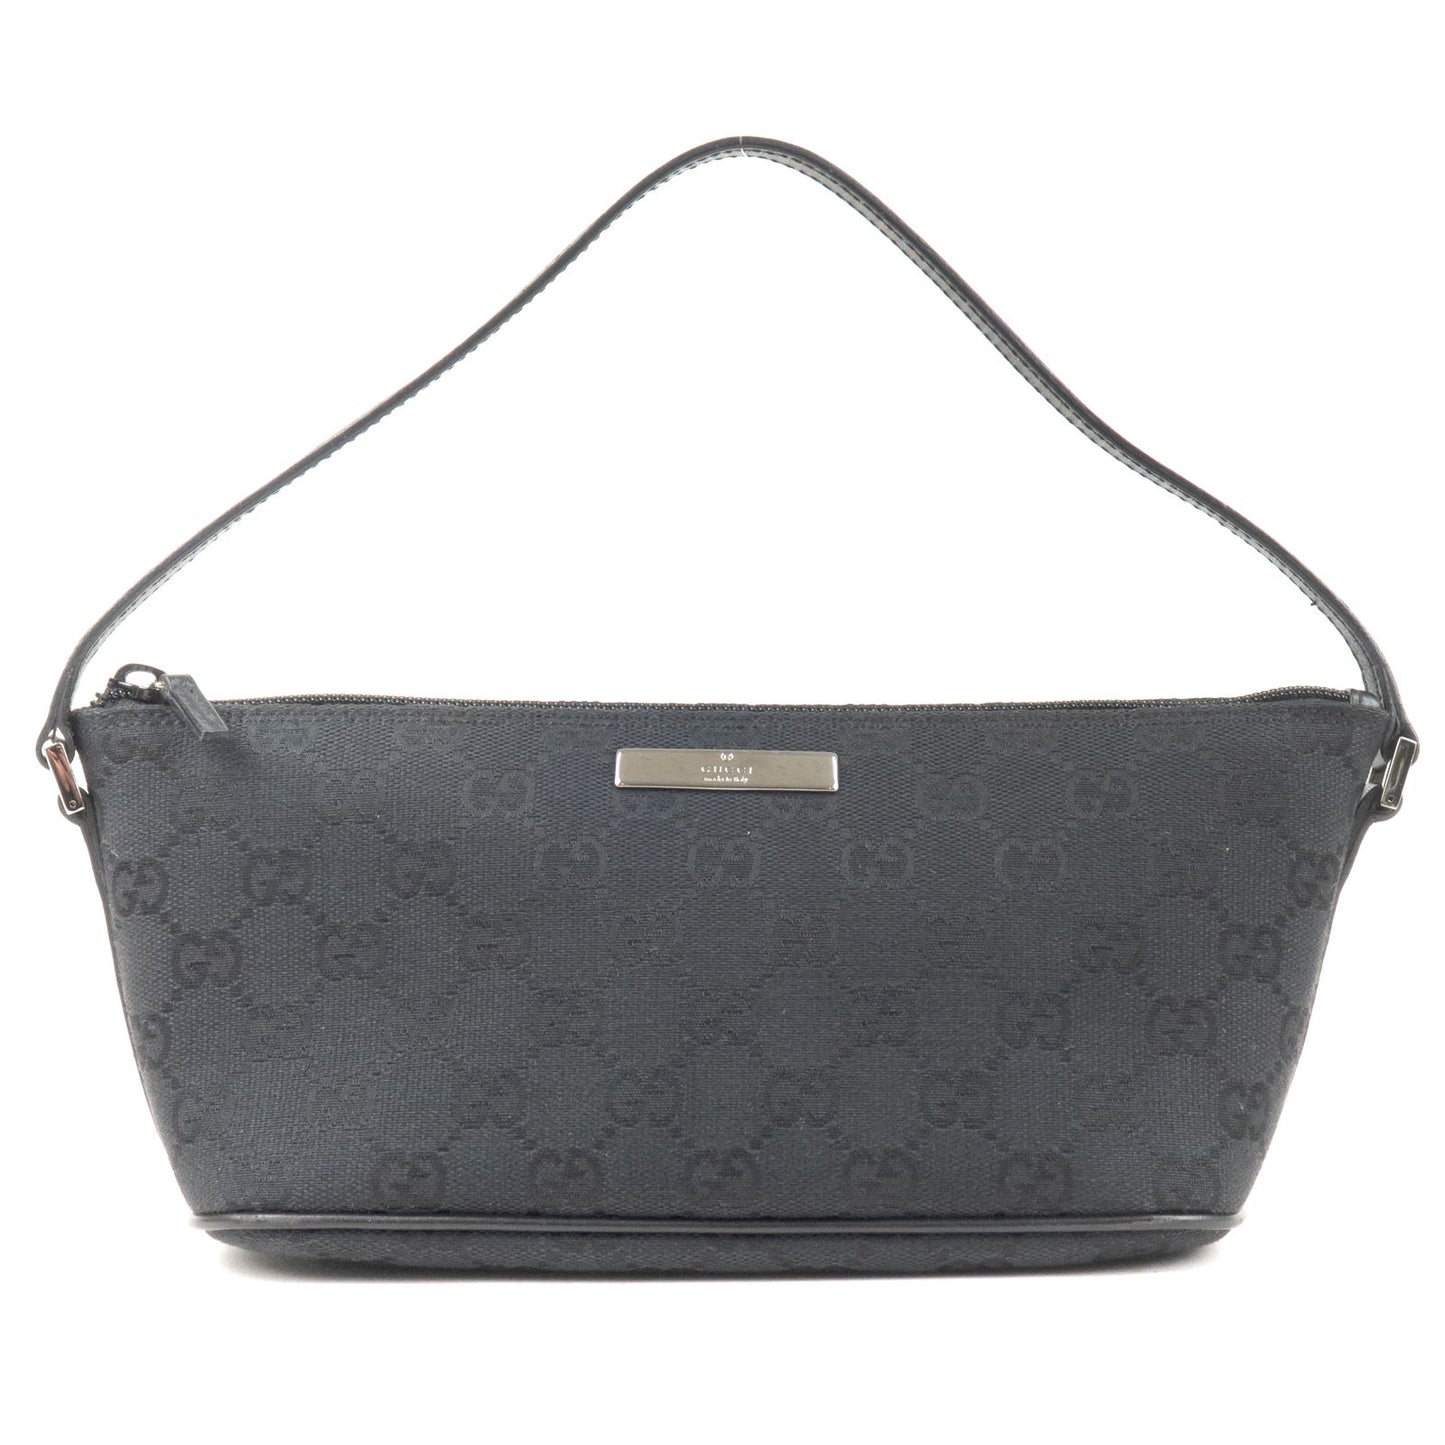 GUCCI-Boat-Bag-GG-Canvas-Leather-Hand-Bag-Poach-Black-07198